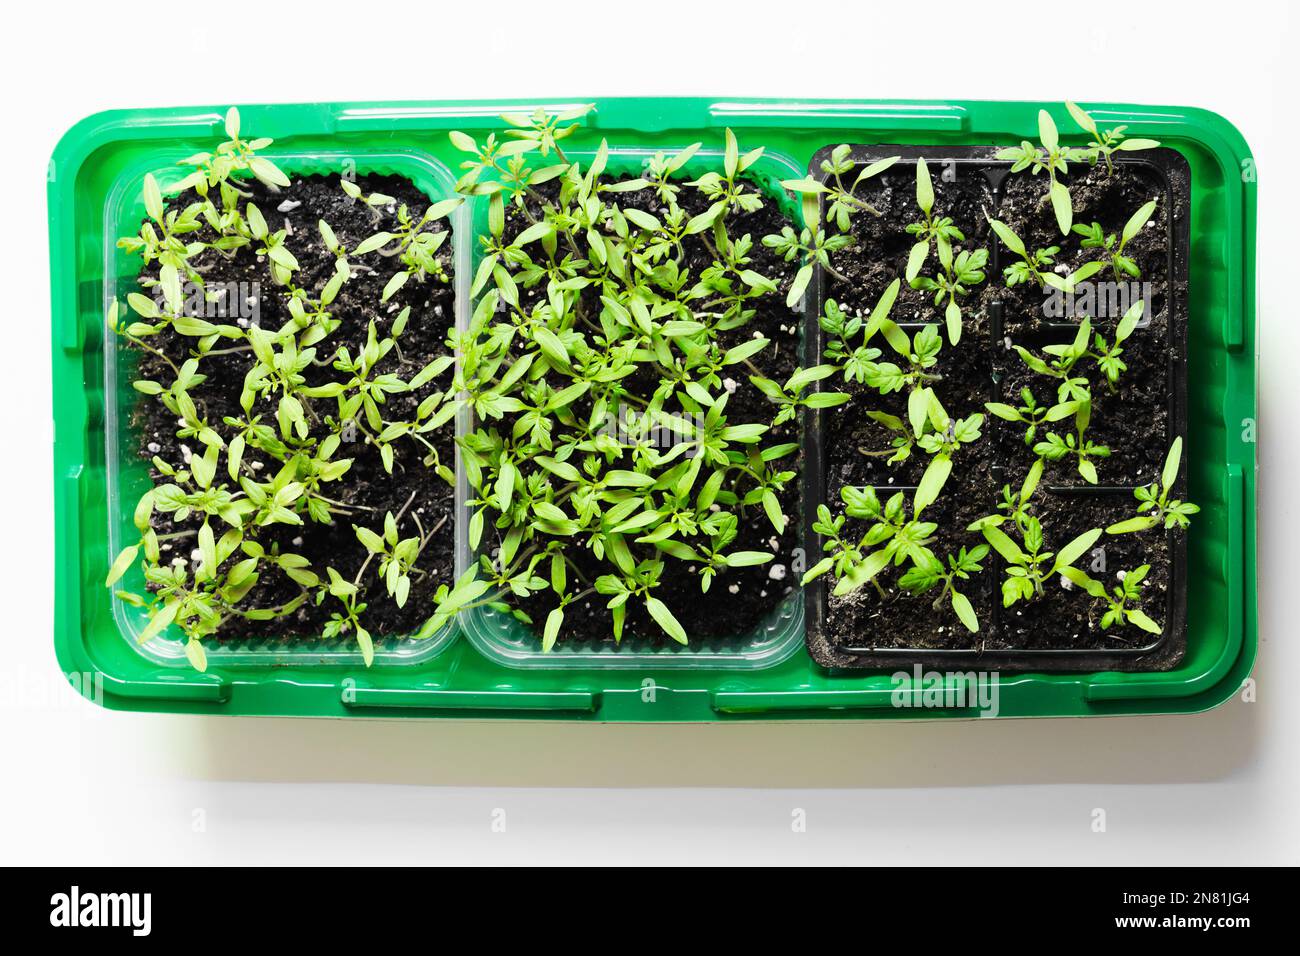 Plastic box with growing plant seedlings stands on a white background. Top view Stock Photo